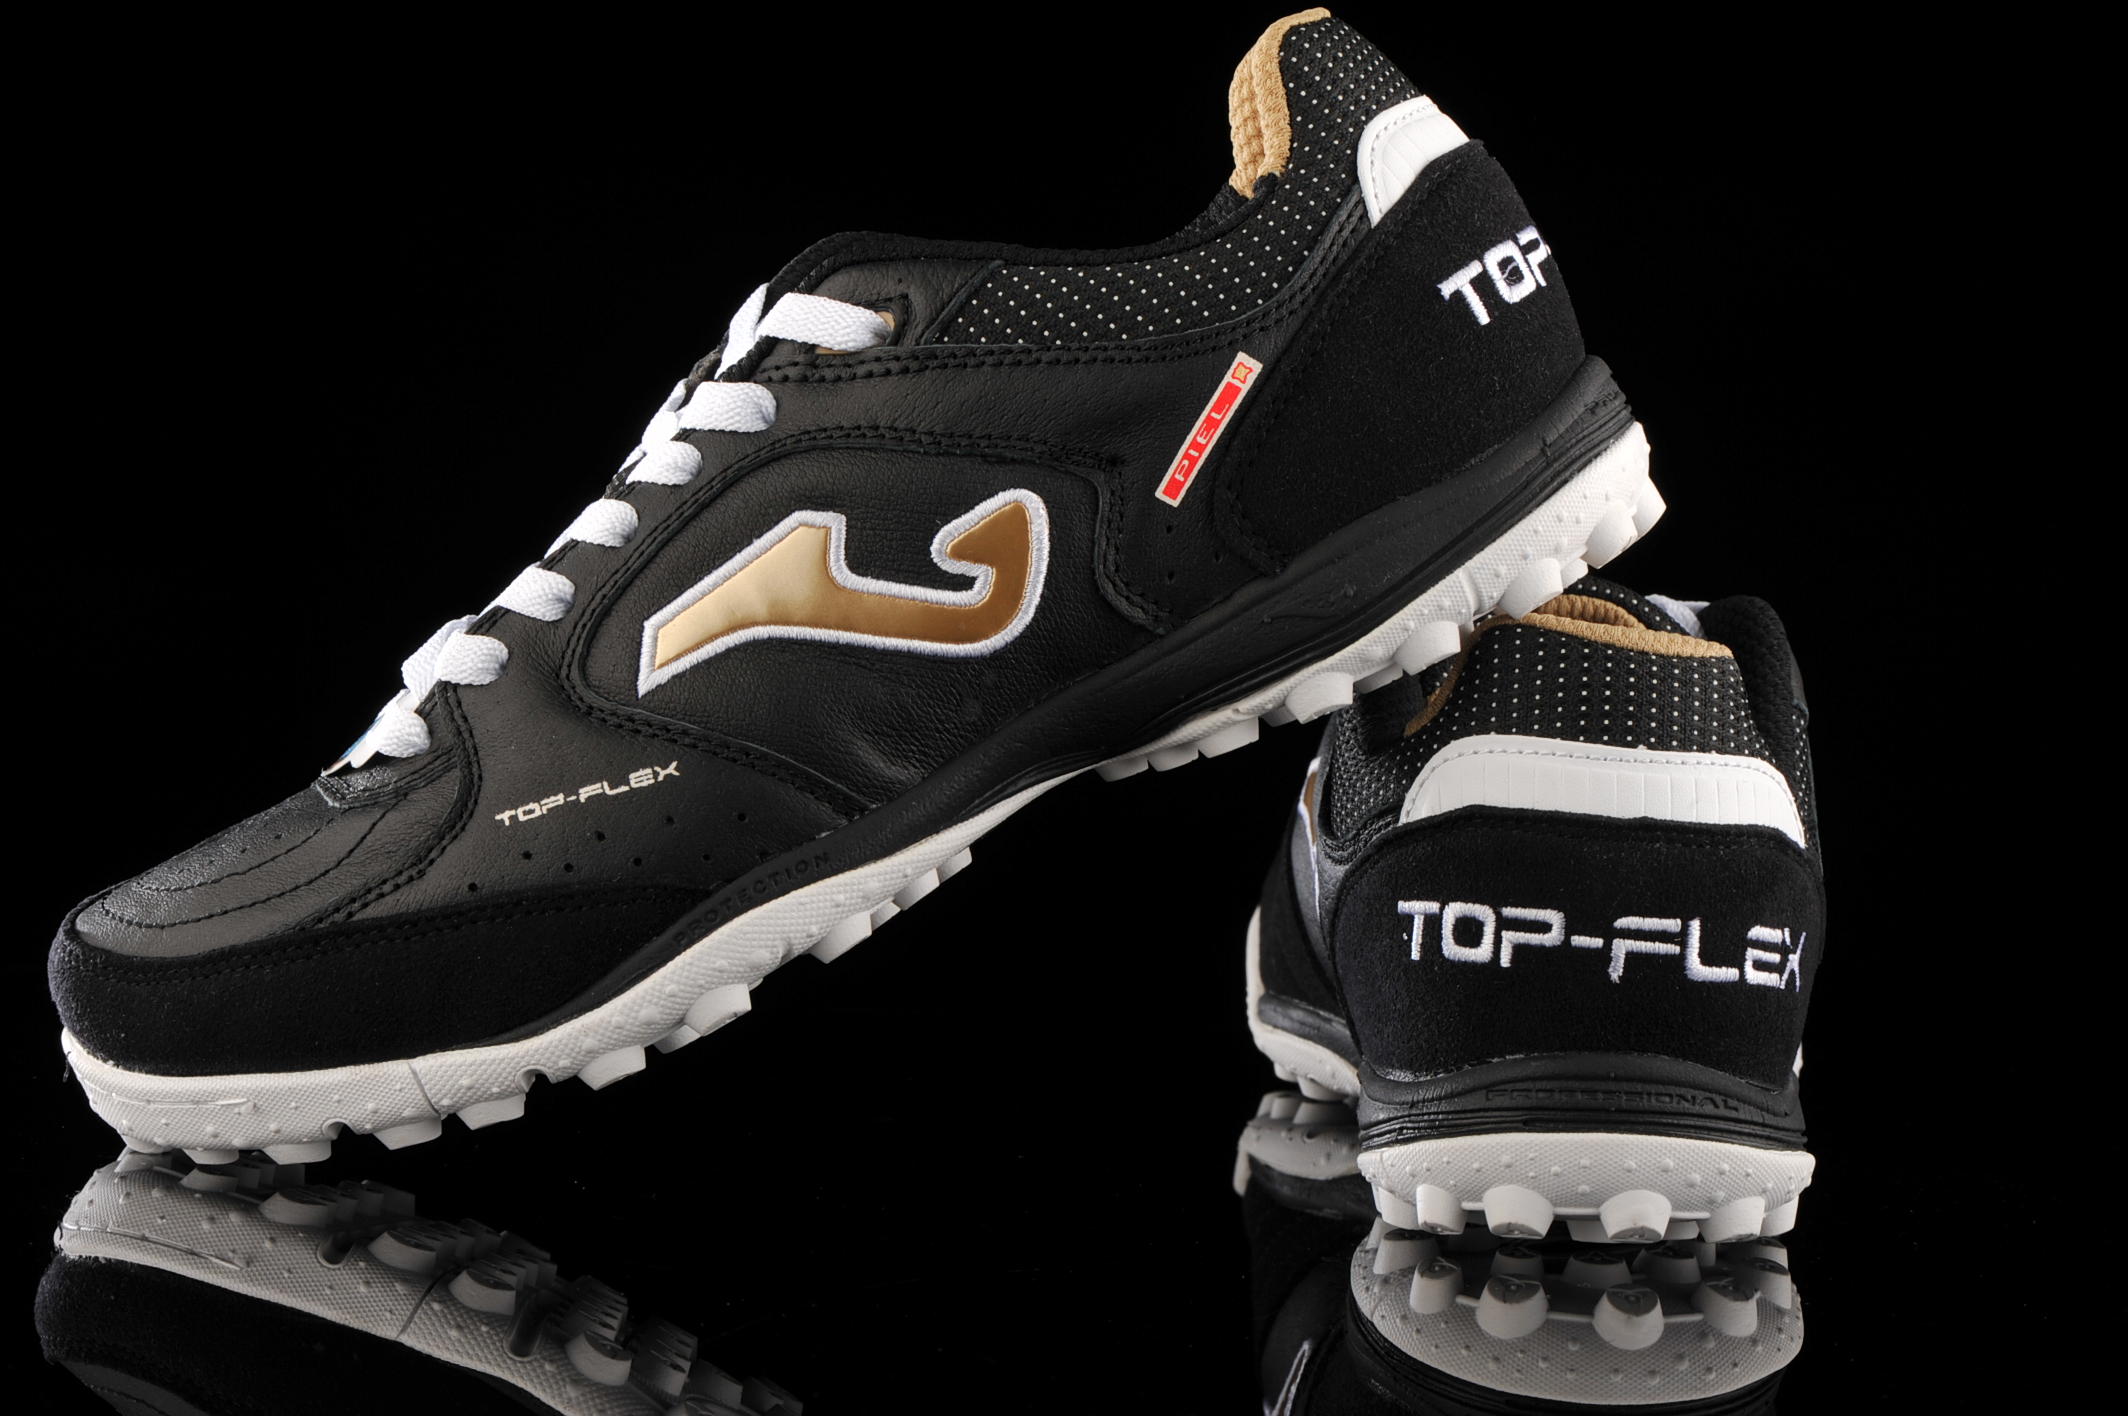 Details about   Shoes  Joma Top Flex TF TOPW.801.TF black 40 Soccer Football Boots 